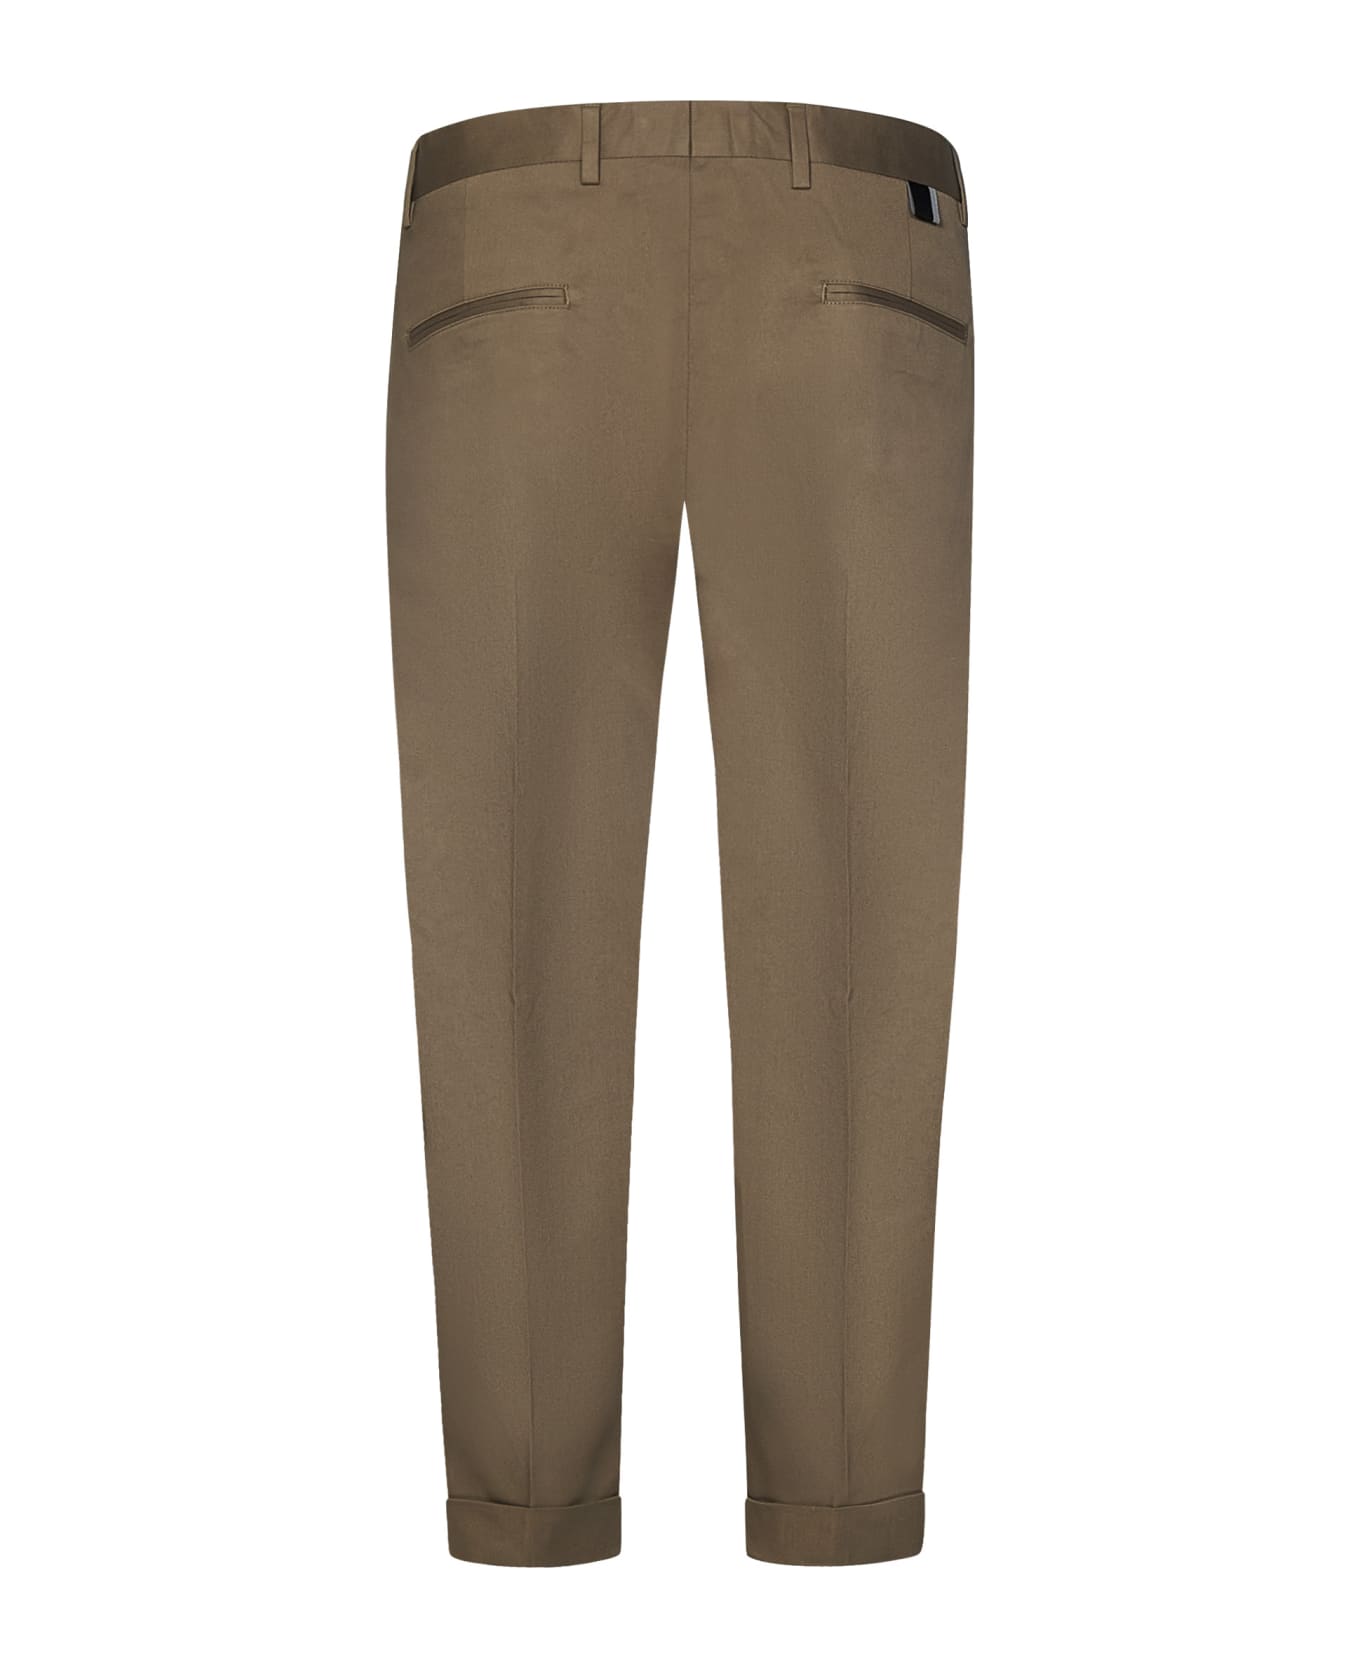 Low Brand Cooper T1.7 Trousers - Brown ボトムス